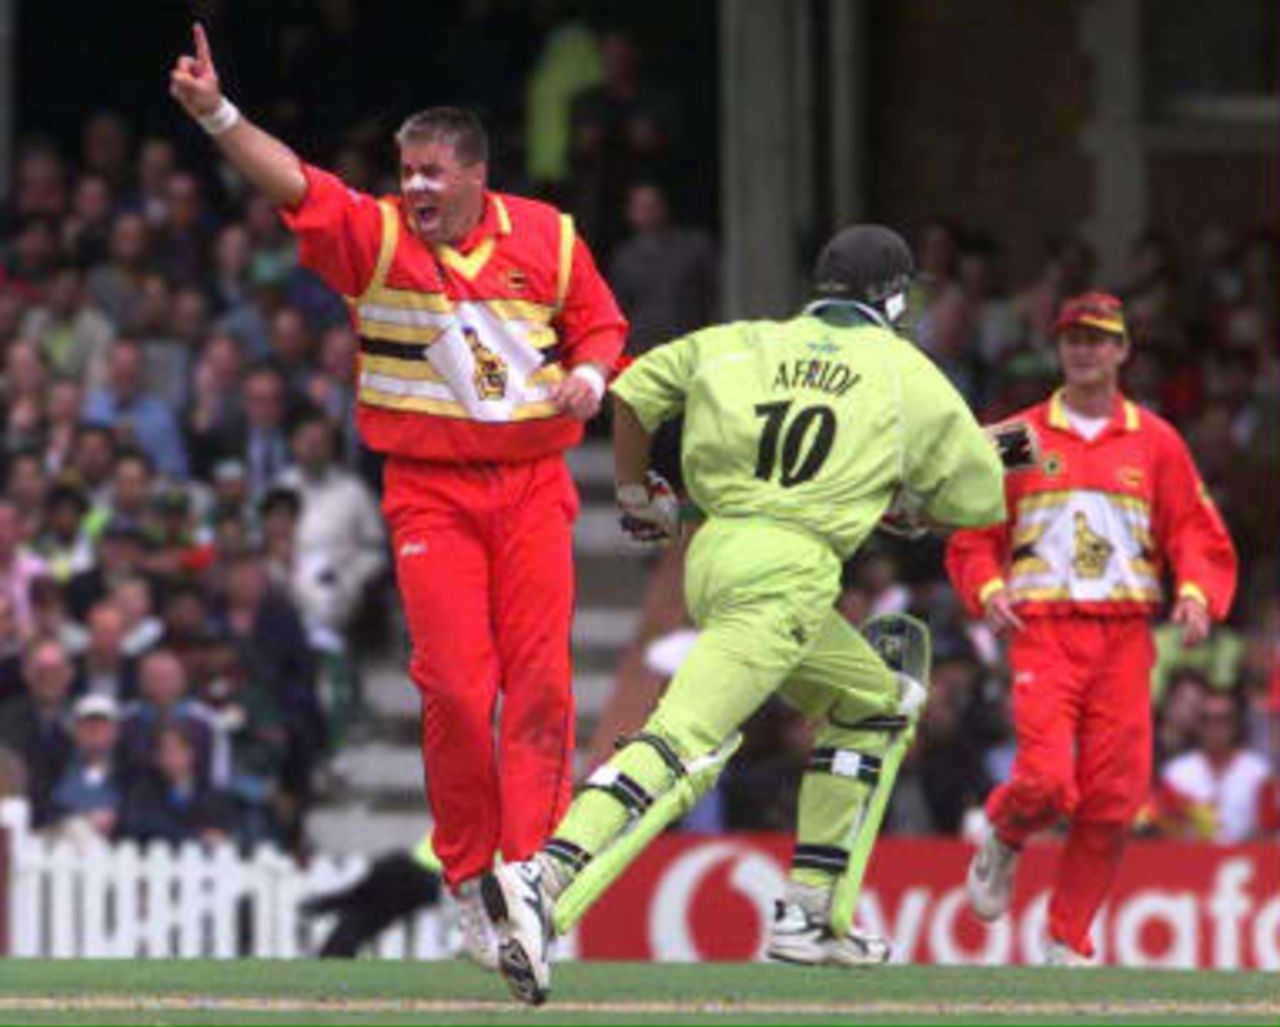 Zimbabwe bowler Heath Streak (L) celebrates the wicket of Azhar Mahmood (not pictured) during the 11 June 1999 Cricket World Cup Super Six match against Pakistan at The Oval, London